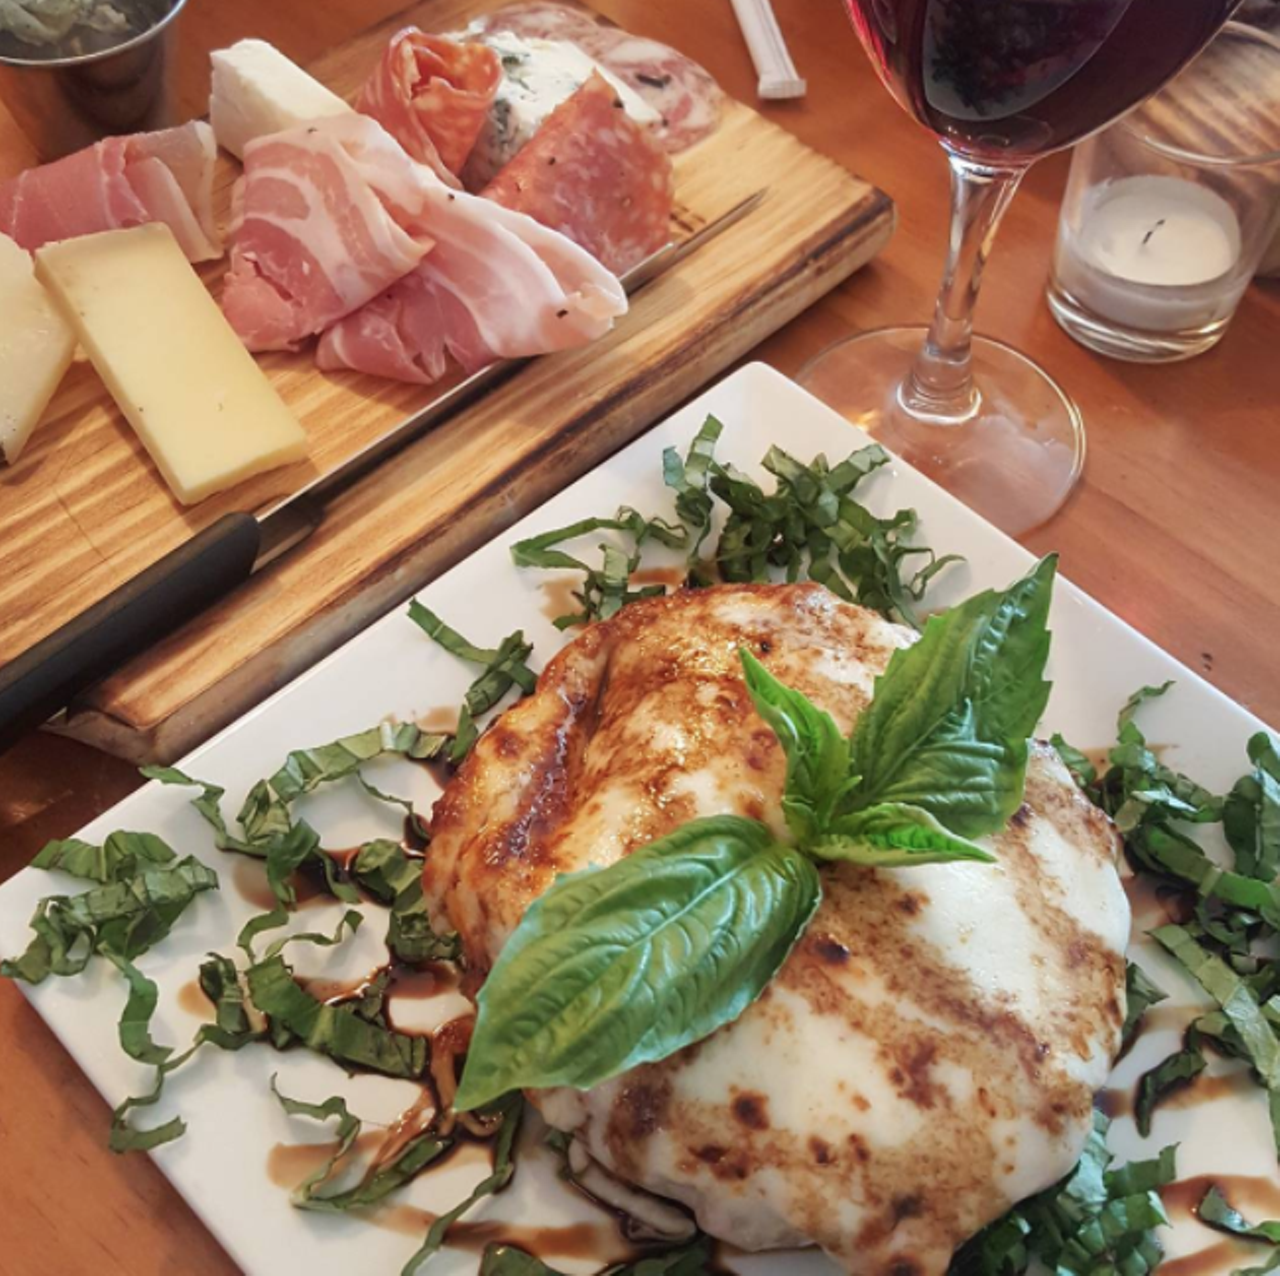 Reds, Whites & Brews Restaurant
15614 Huebner Road, (210) 493-7599
Since May of 2016, this eatery has kept fans happy with their baked brie and jalapeno, cheesy flatbread and expansive list of wines and regional beers.
Photo via Instagram, moonbeba